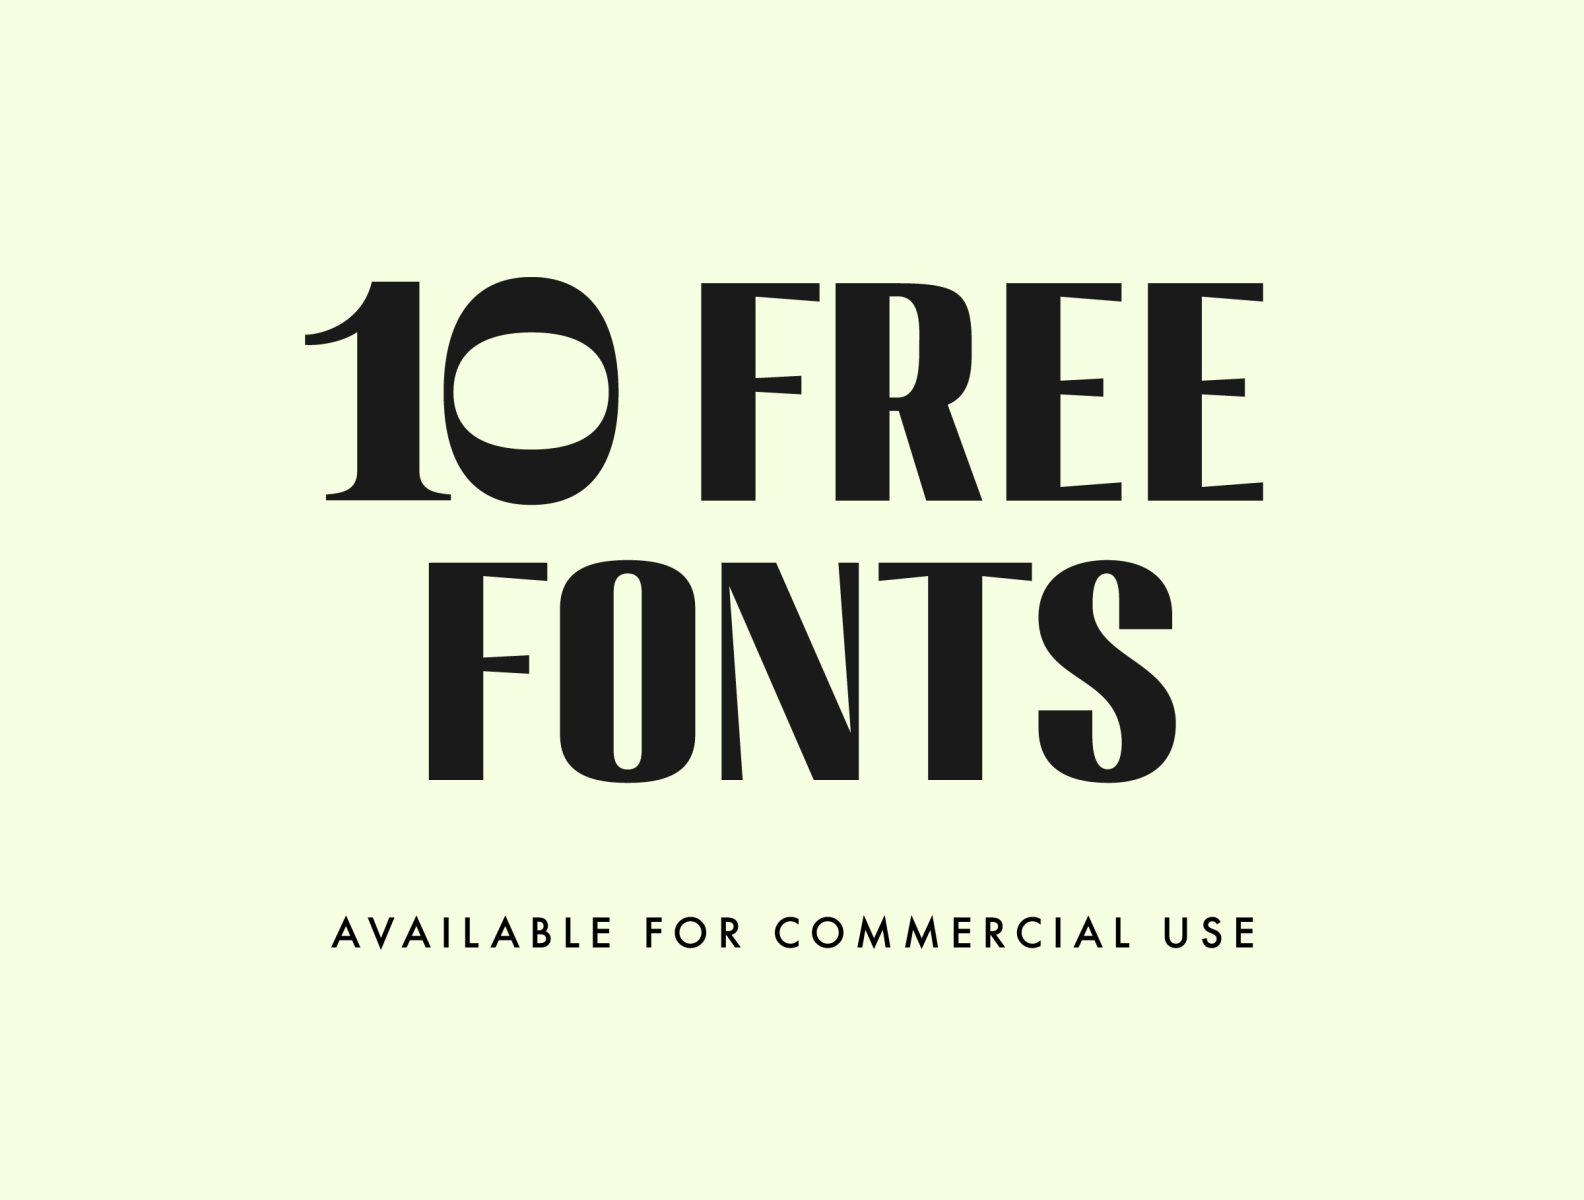 10 Free Fonts For Commercial Use by Cristie Stevens on Dribbble